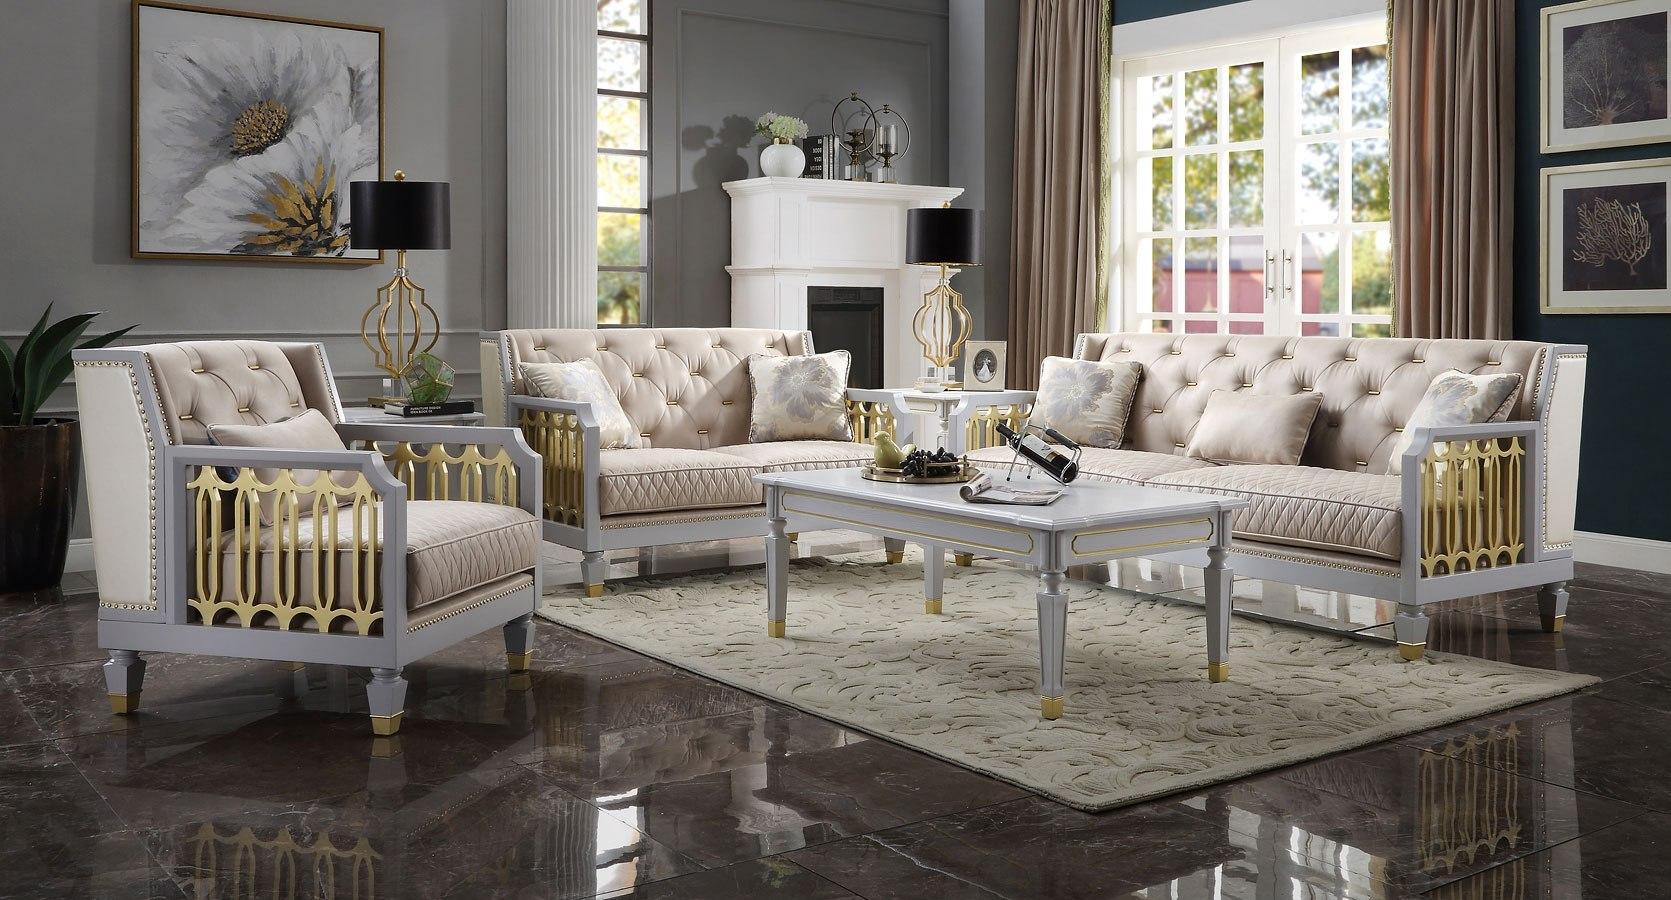 

    
Classic Gold & Pearl Gray Living Room Set by Acme House Marchese 58865-4pcs
